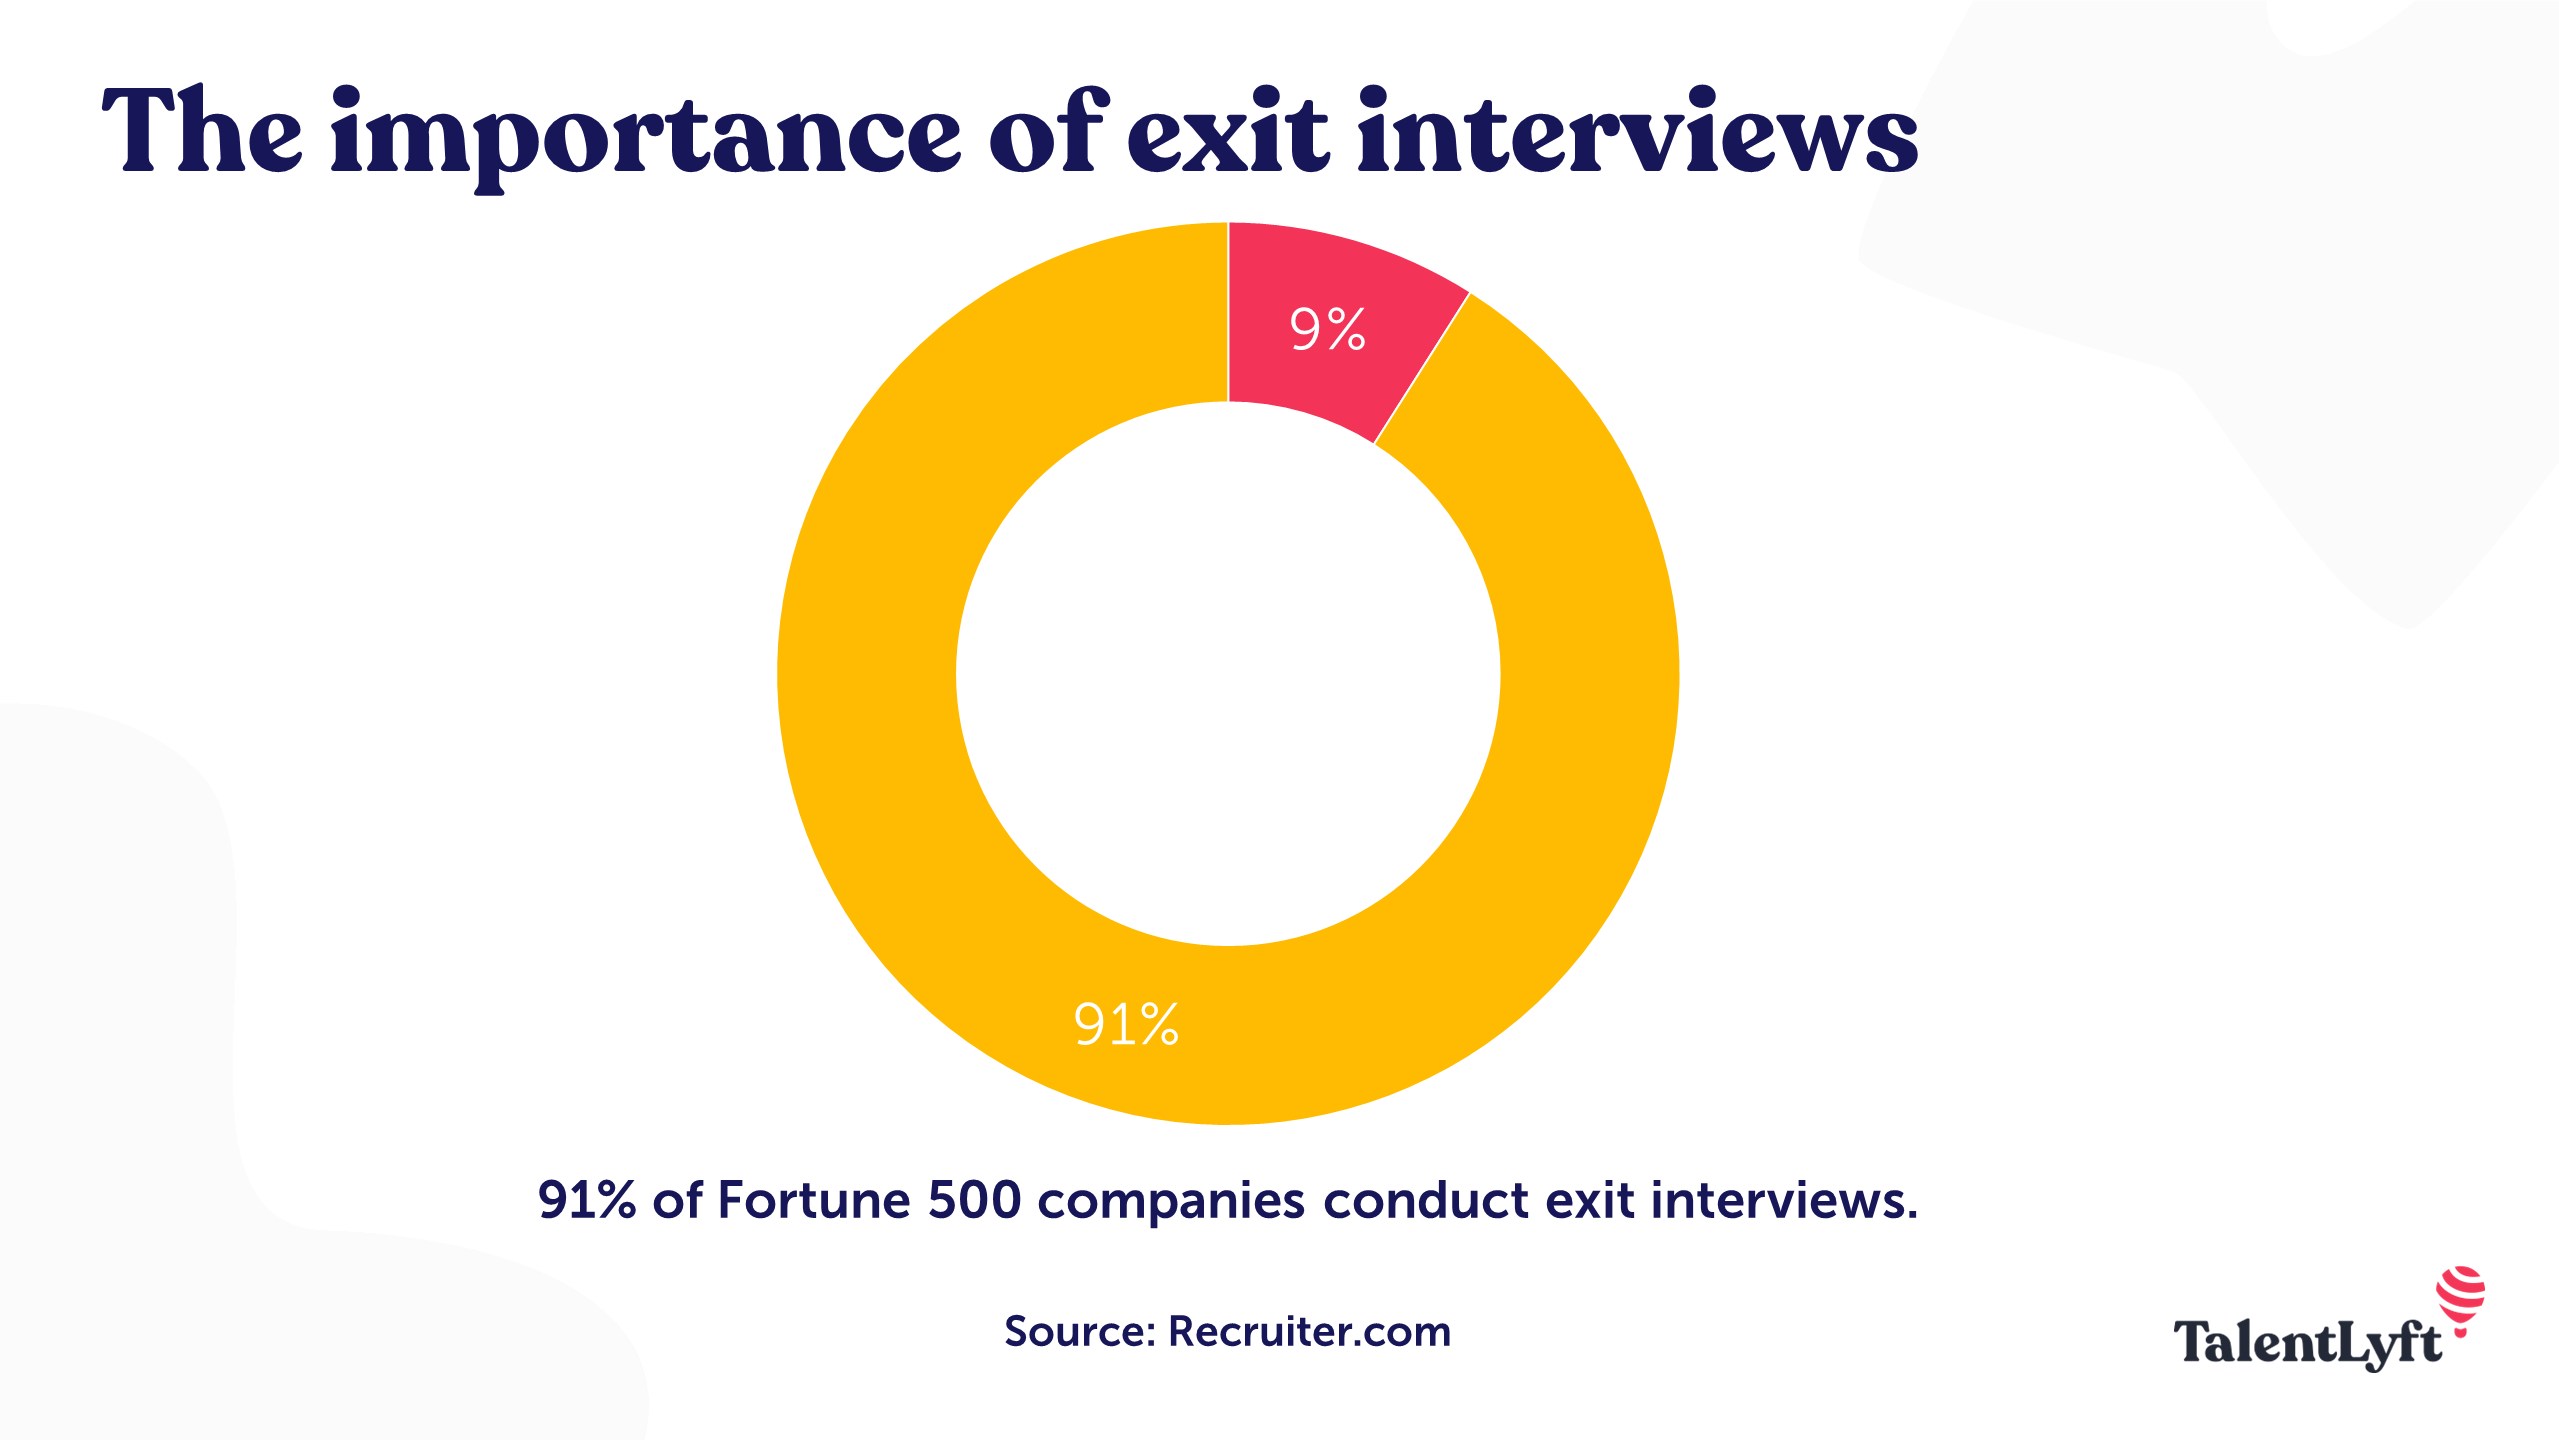 Number of companies conducting exit interviews